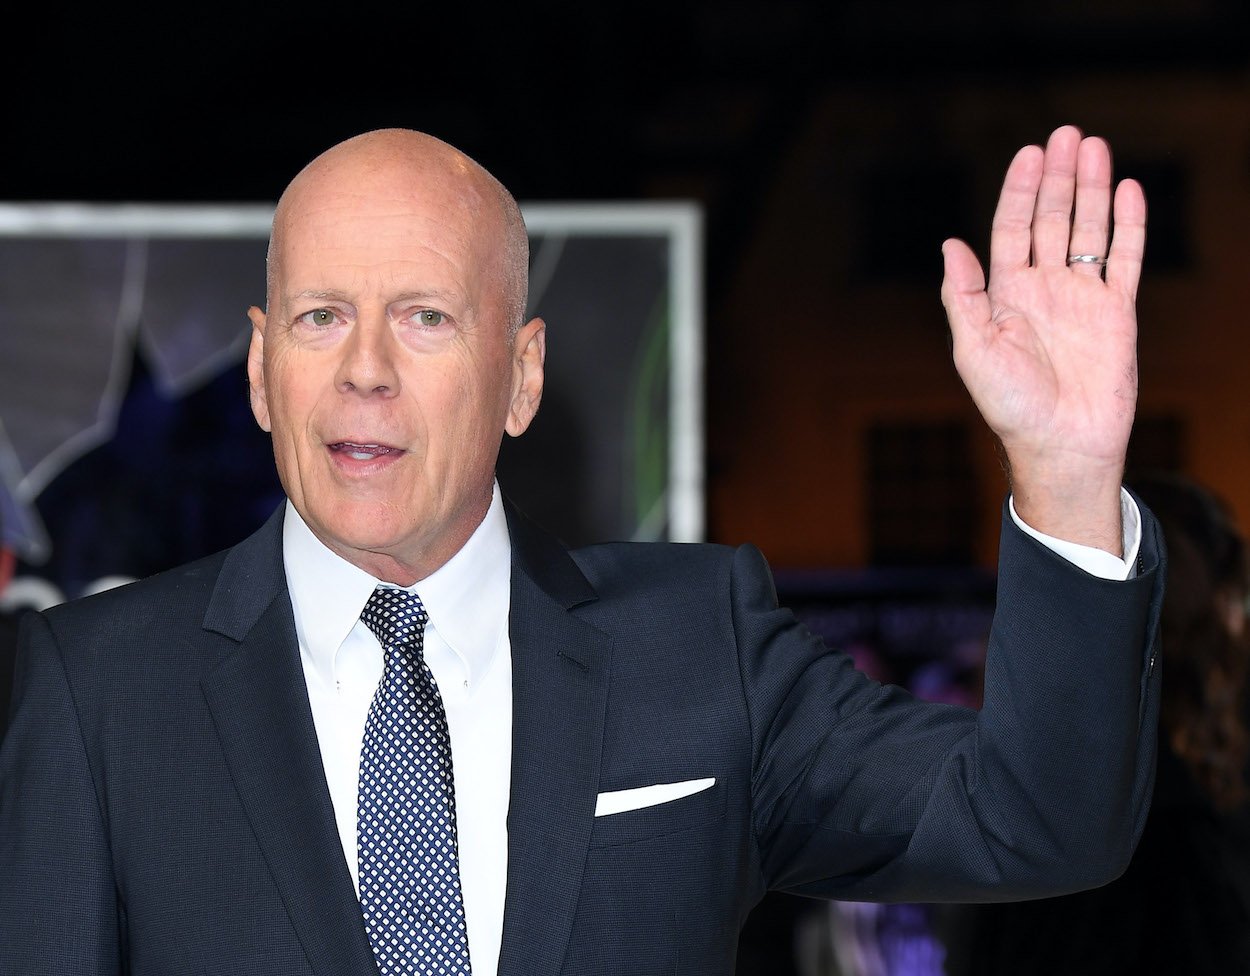 Bruce Willis, who stepped back from acting after an aphasia diagnosis in 2022, appears at the 2019 UK premier of 'Glass.'